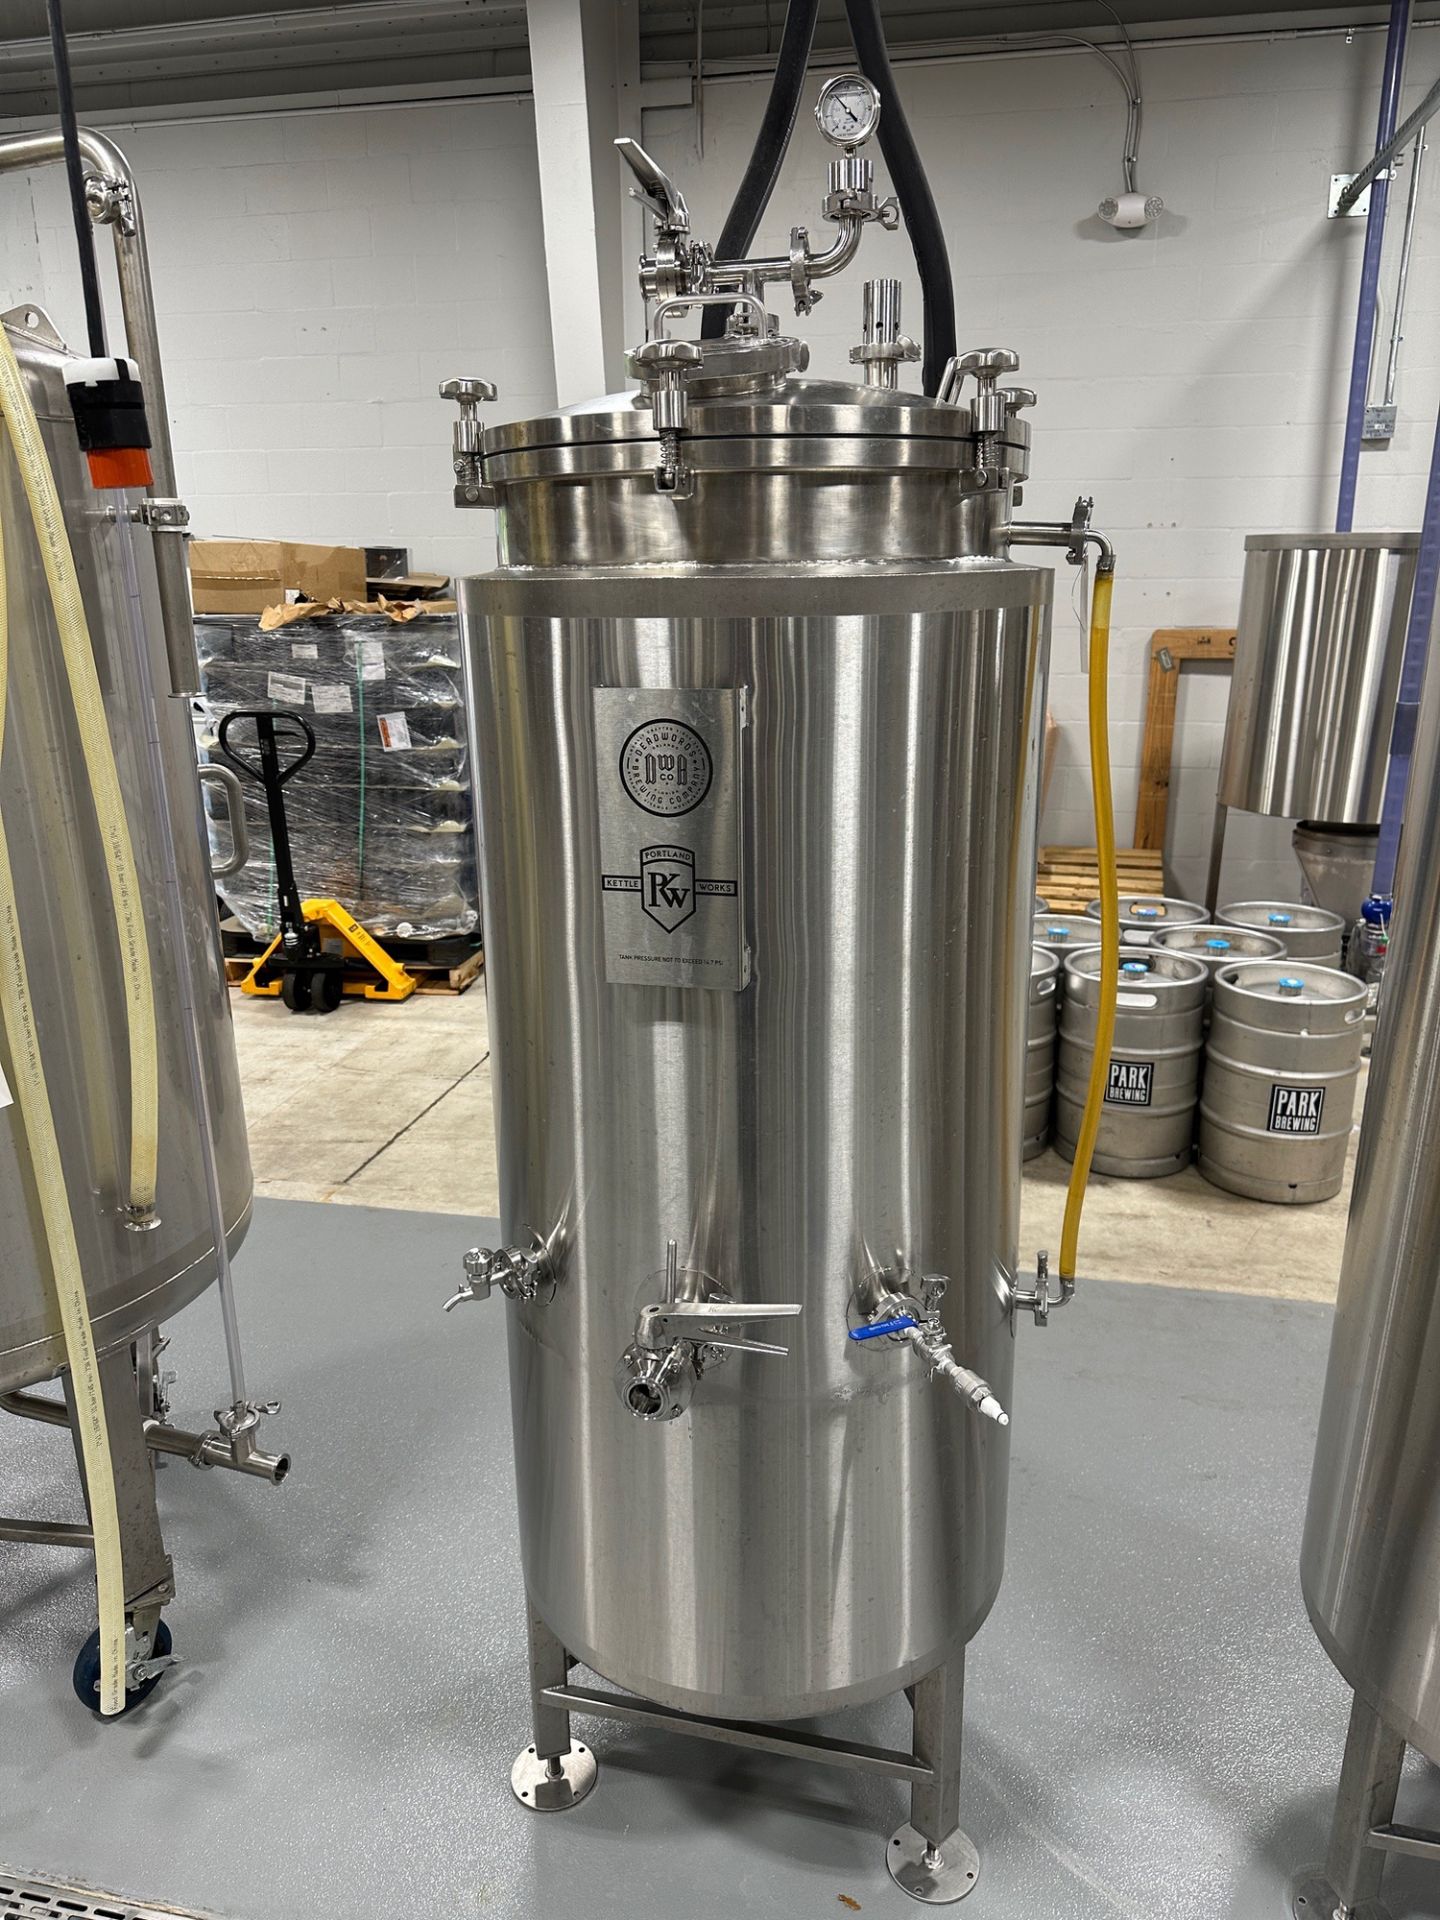 Portland Kettle Works 2 BBL Stainless Steel Unitank - Glycol Jacketed, Zwickle Valve, Sight Glass (